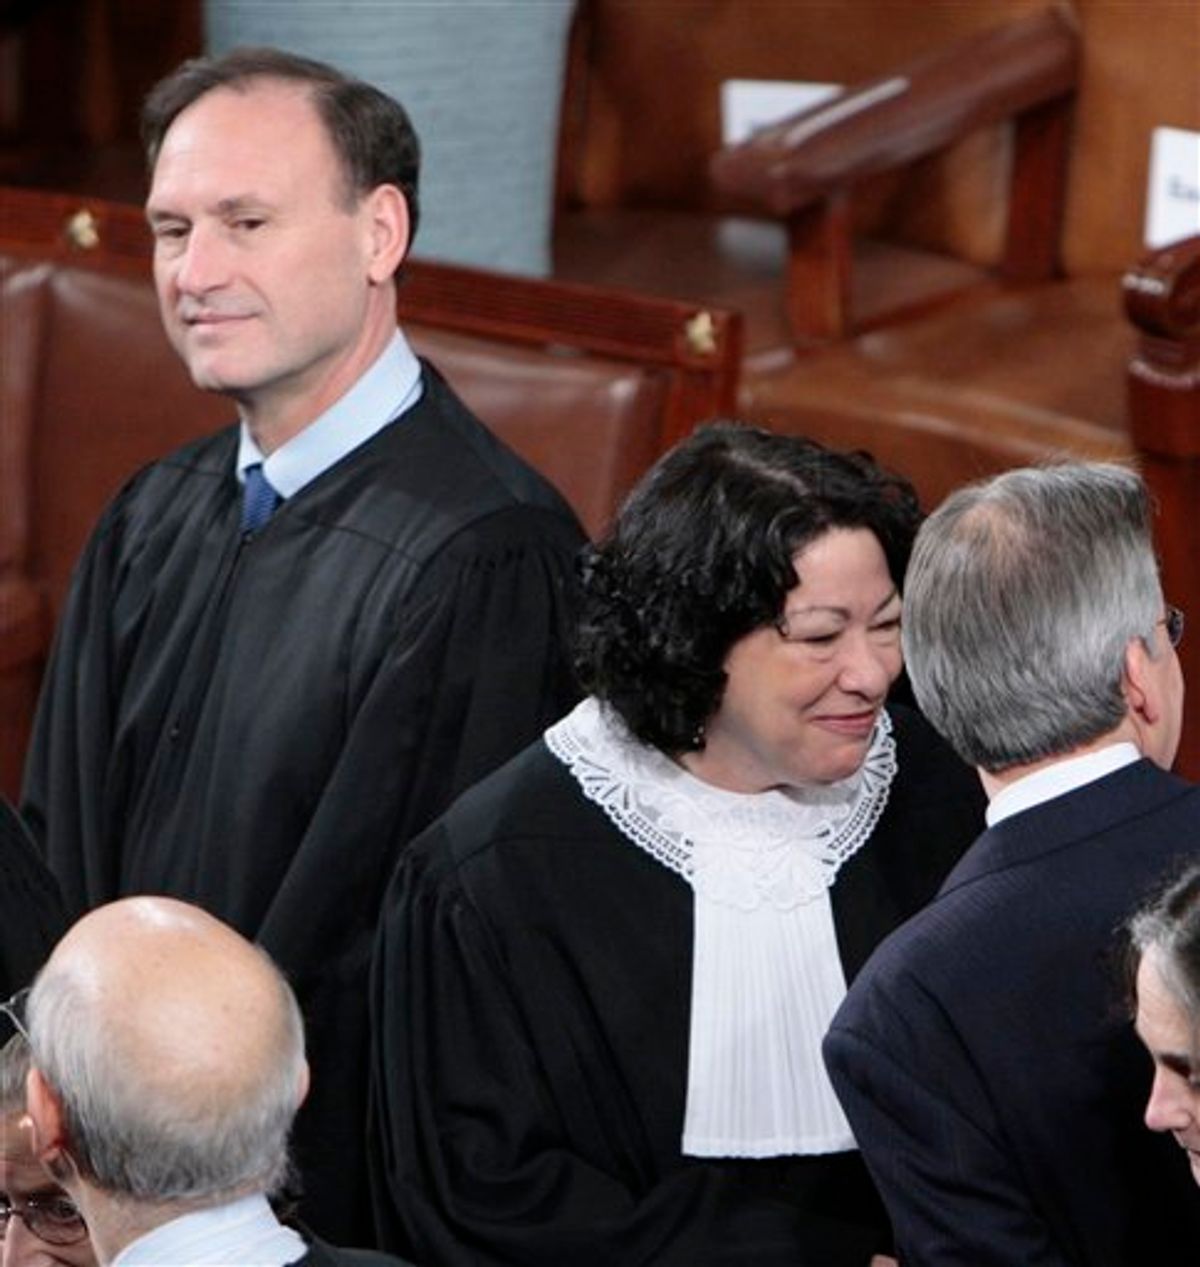 Supreme Court Justice Samuel Alito, left, and Sonia Sotomayor, center, are seen on Capitol Hill in Washington, Wednesday, Jan. 27, 2010, prior to President Barack Obama's State of the Union address . (AP Photo/Pablo Martinez Monsivais)  (AP)